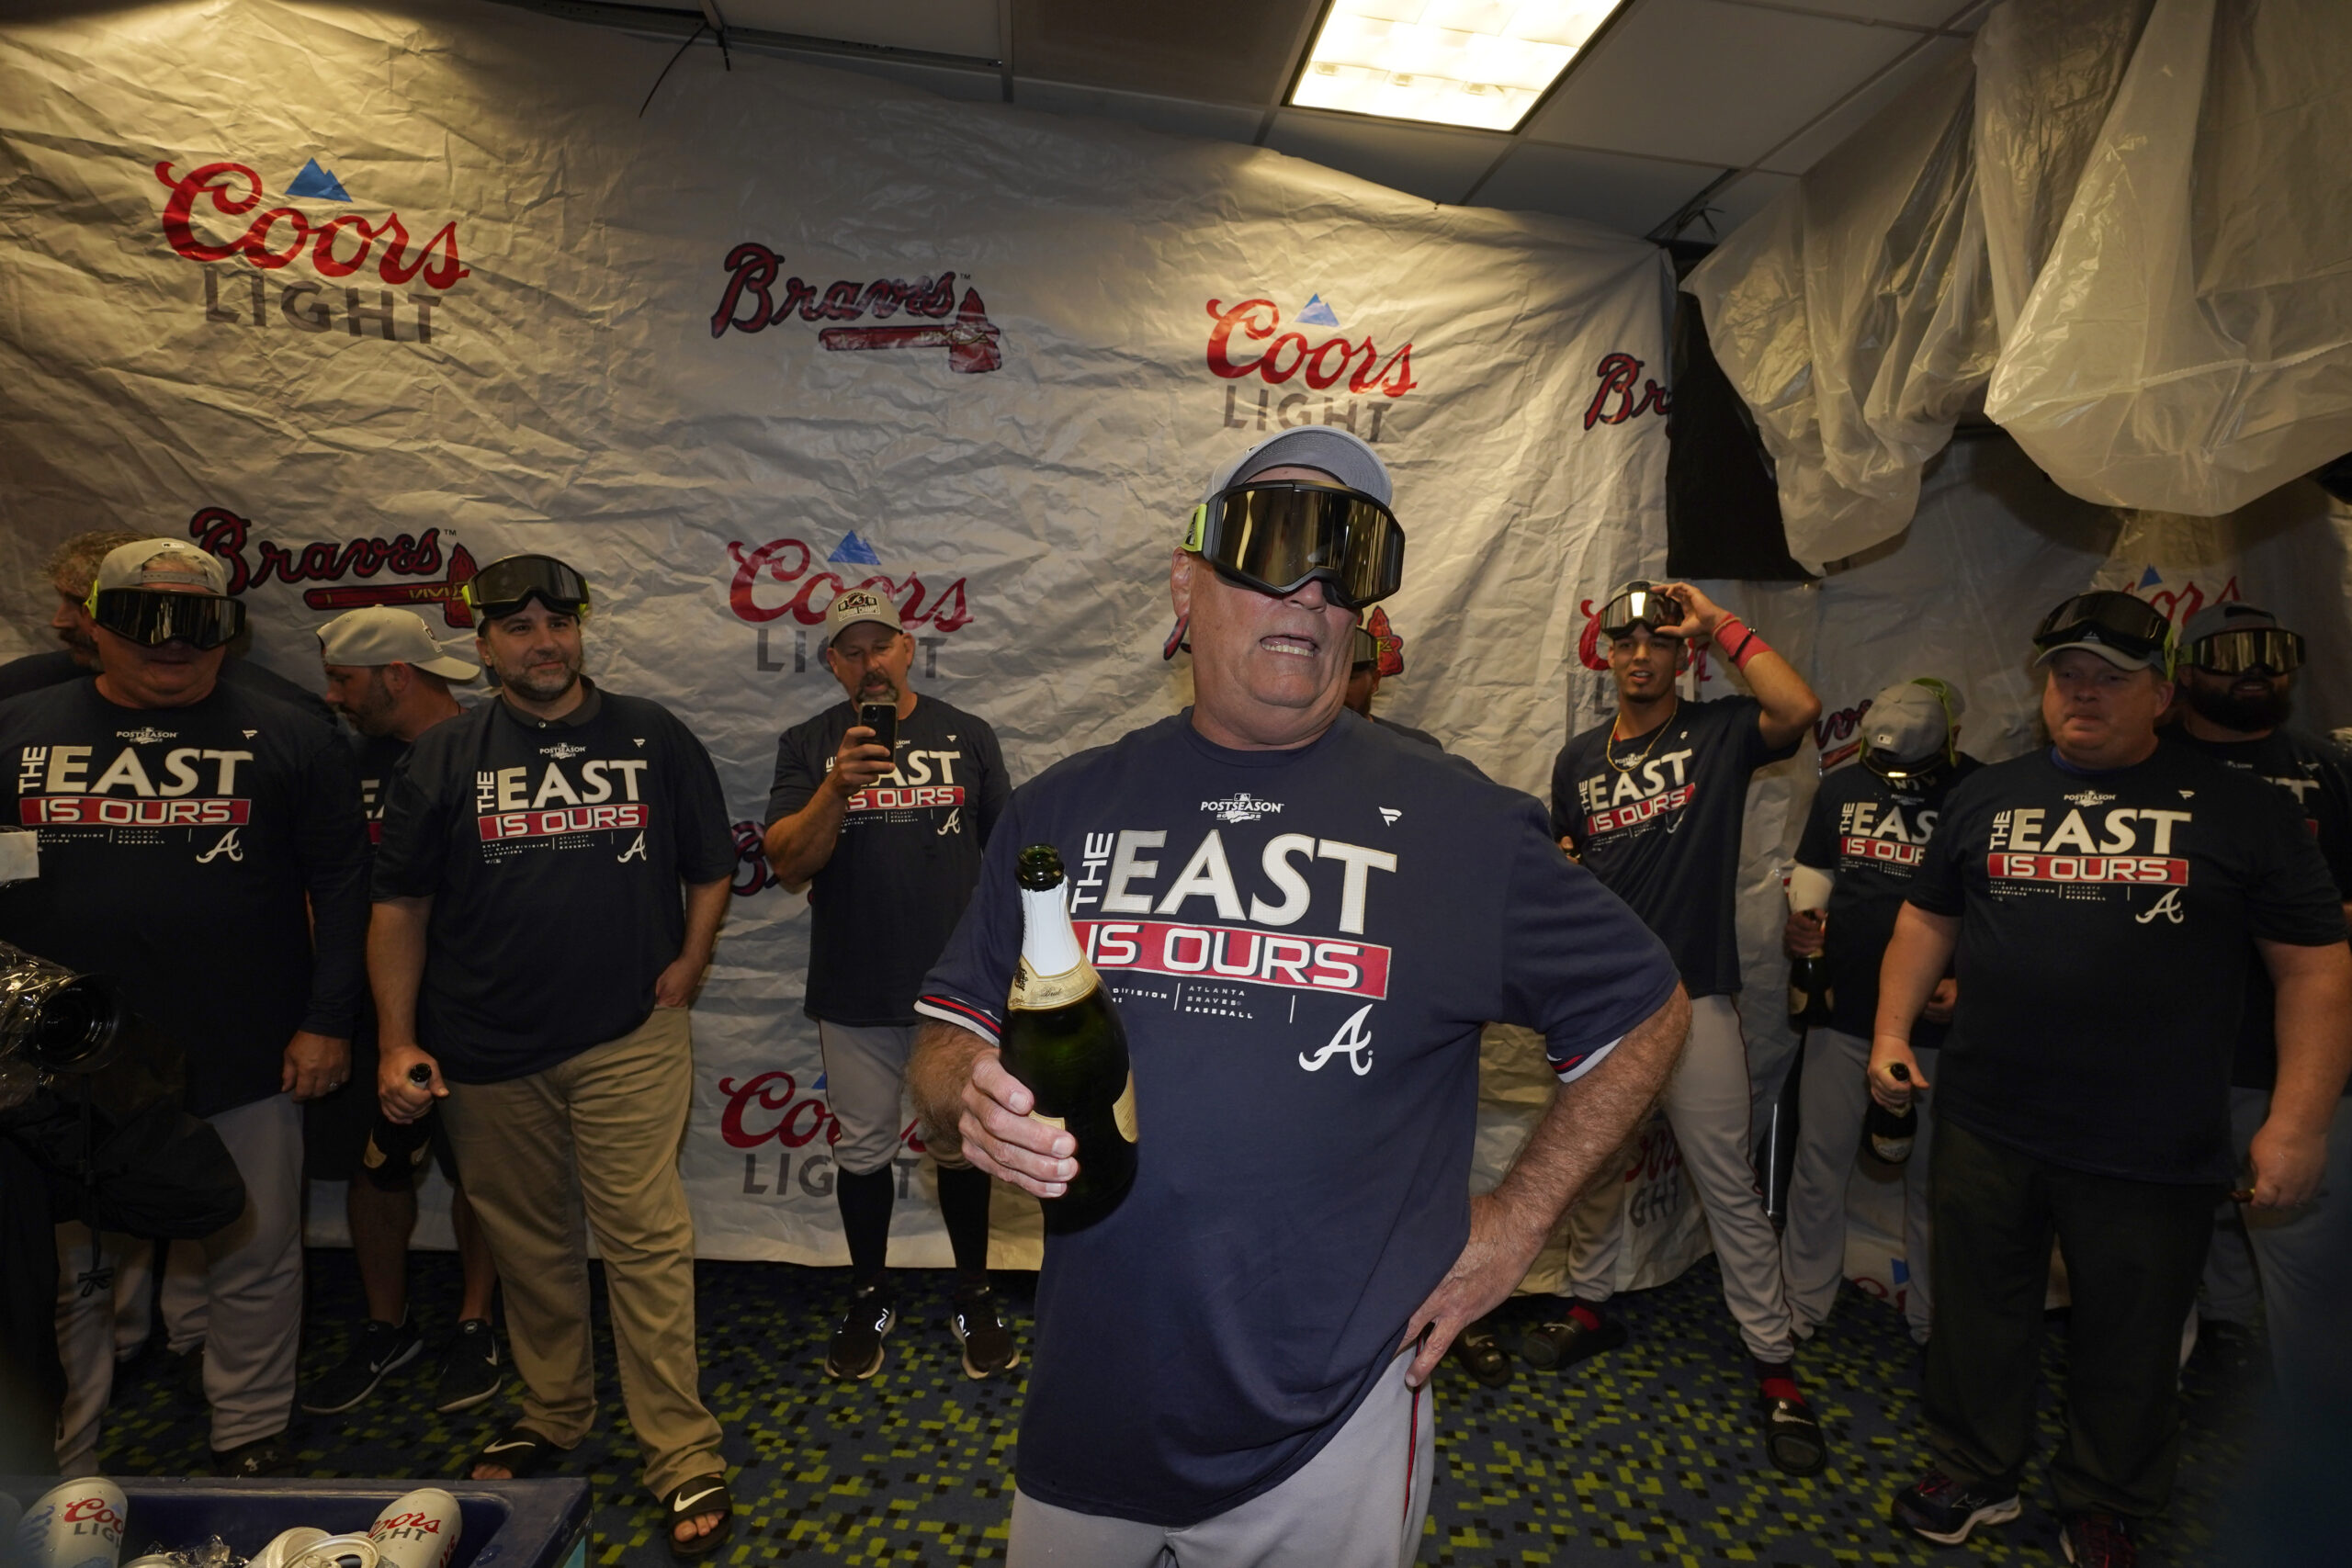 Can the Atlanta Braves Clinch the Division This Week?